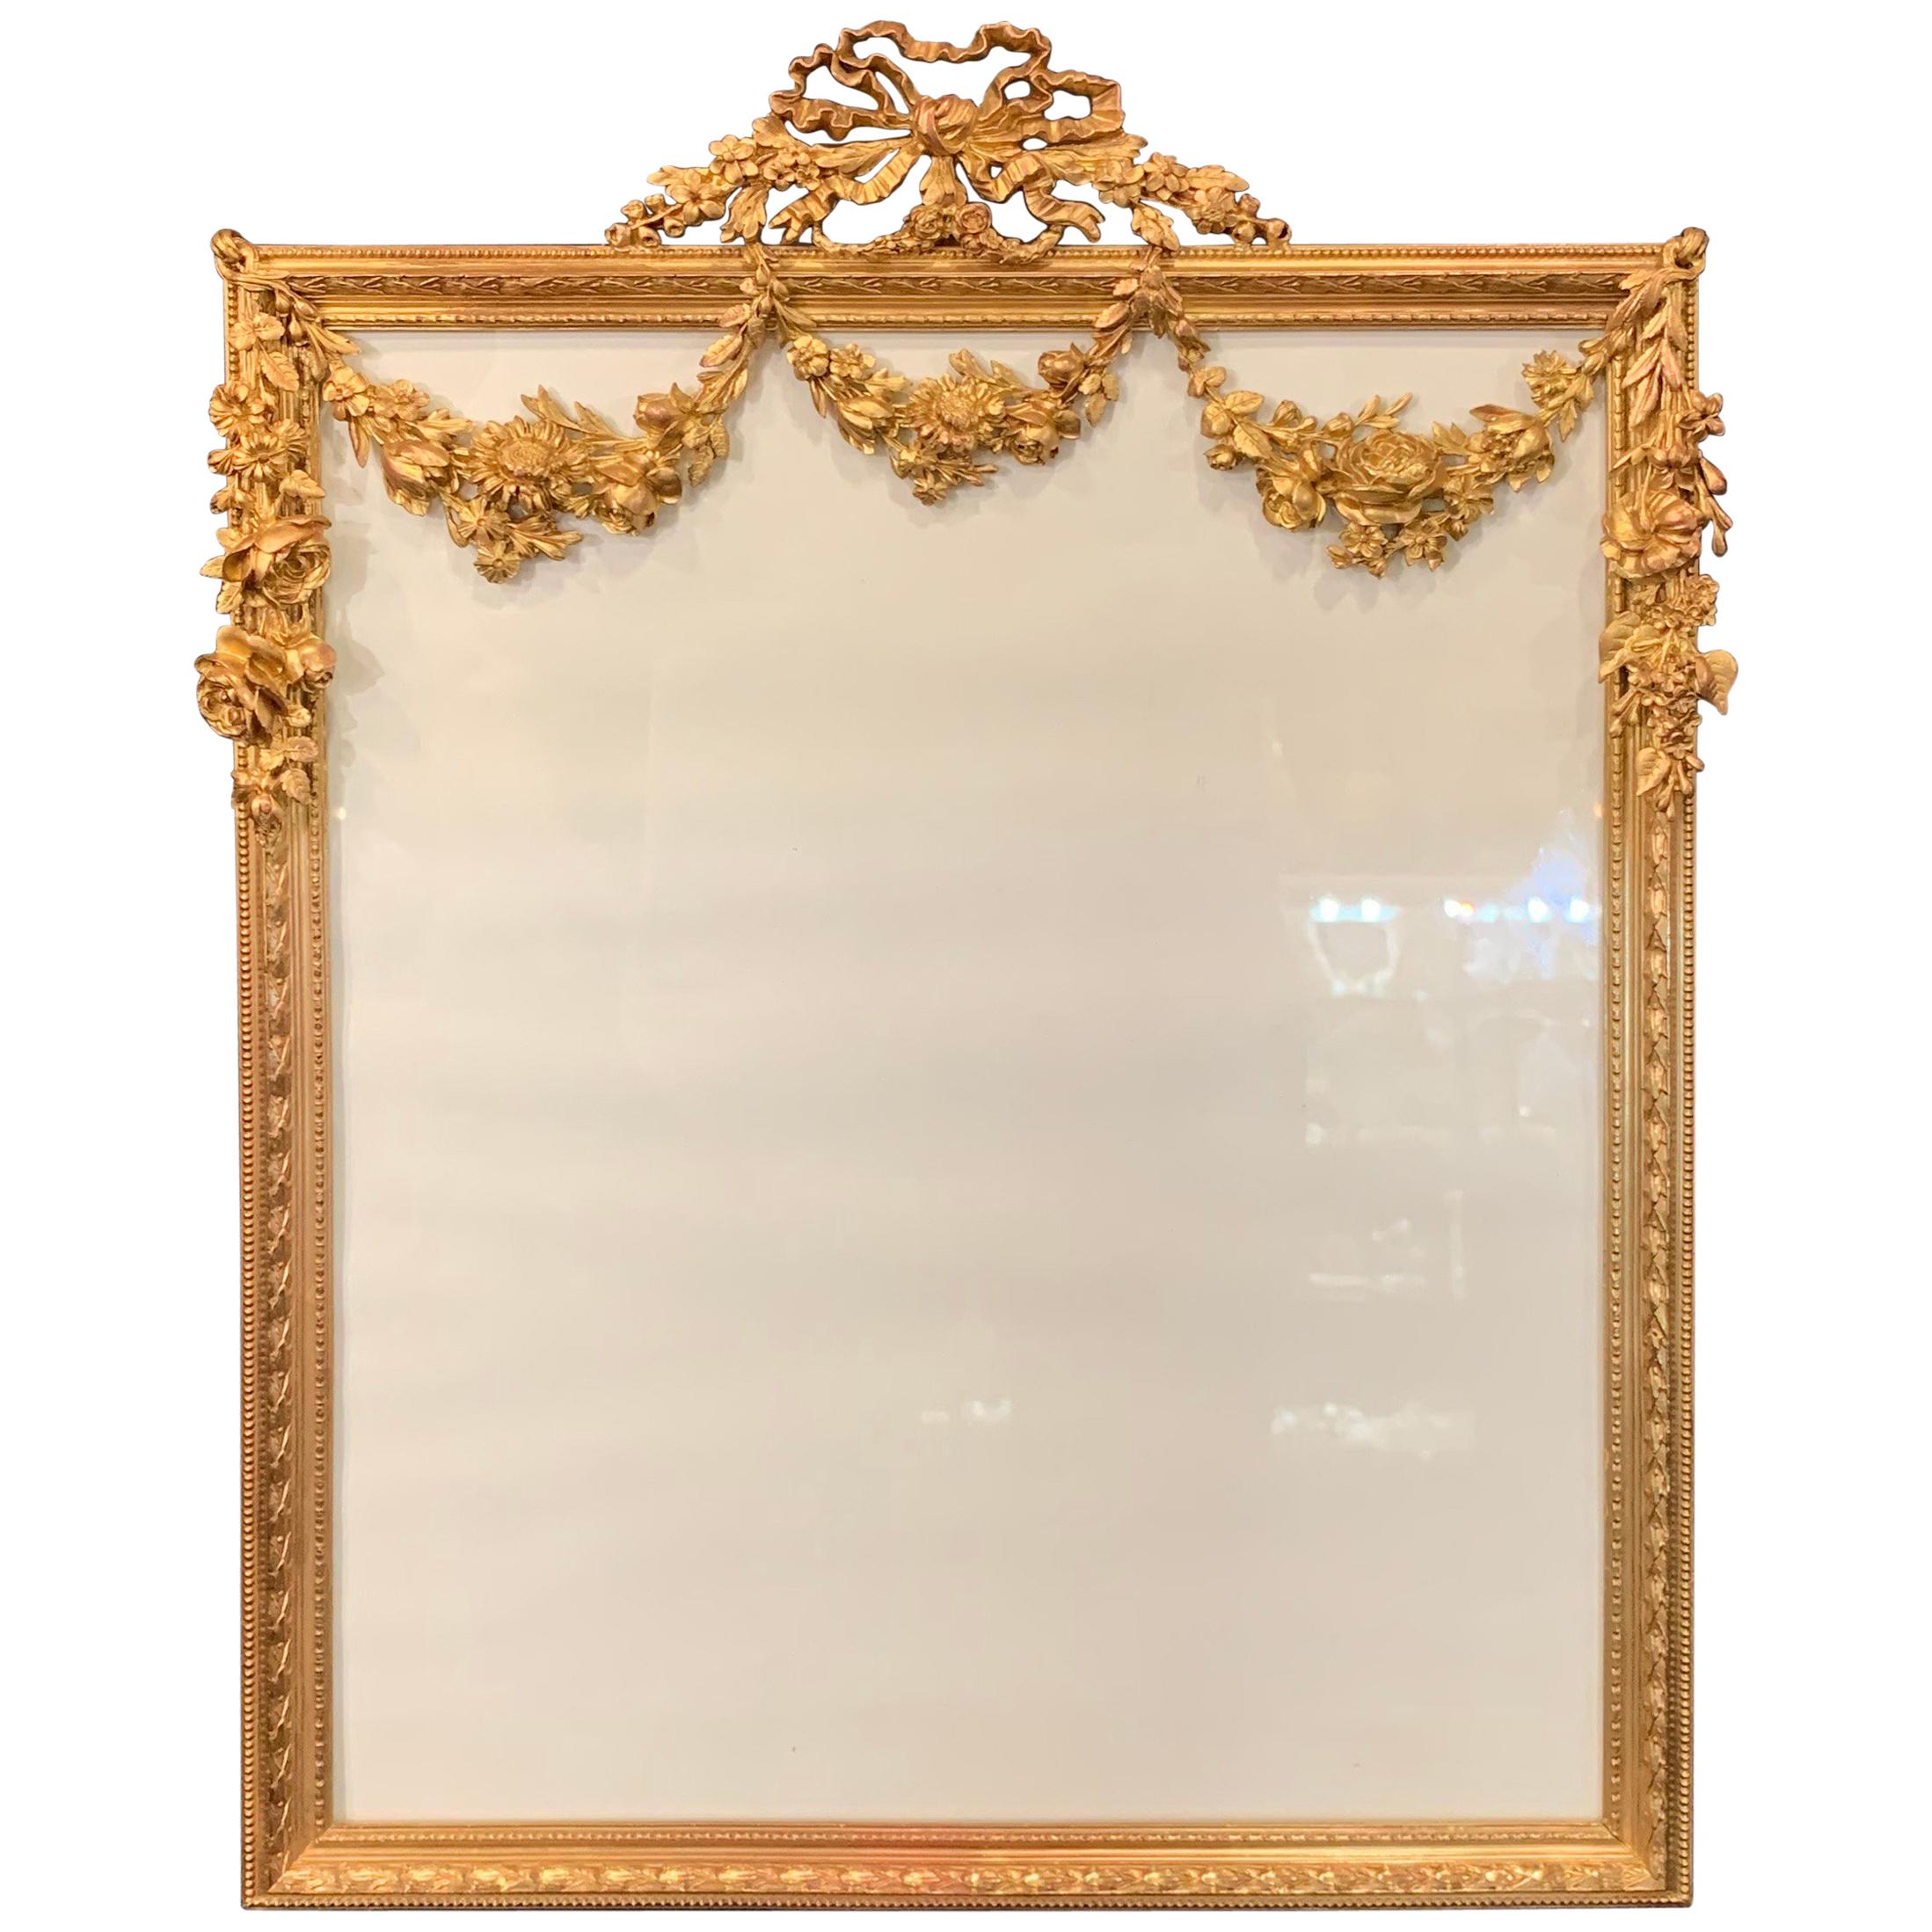 Wonderful French Large Bronze Ormolu Bow Top Garland Swag Picture Frame